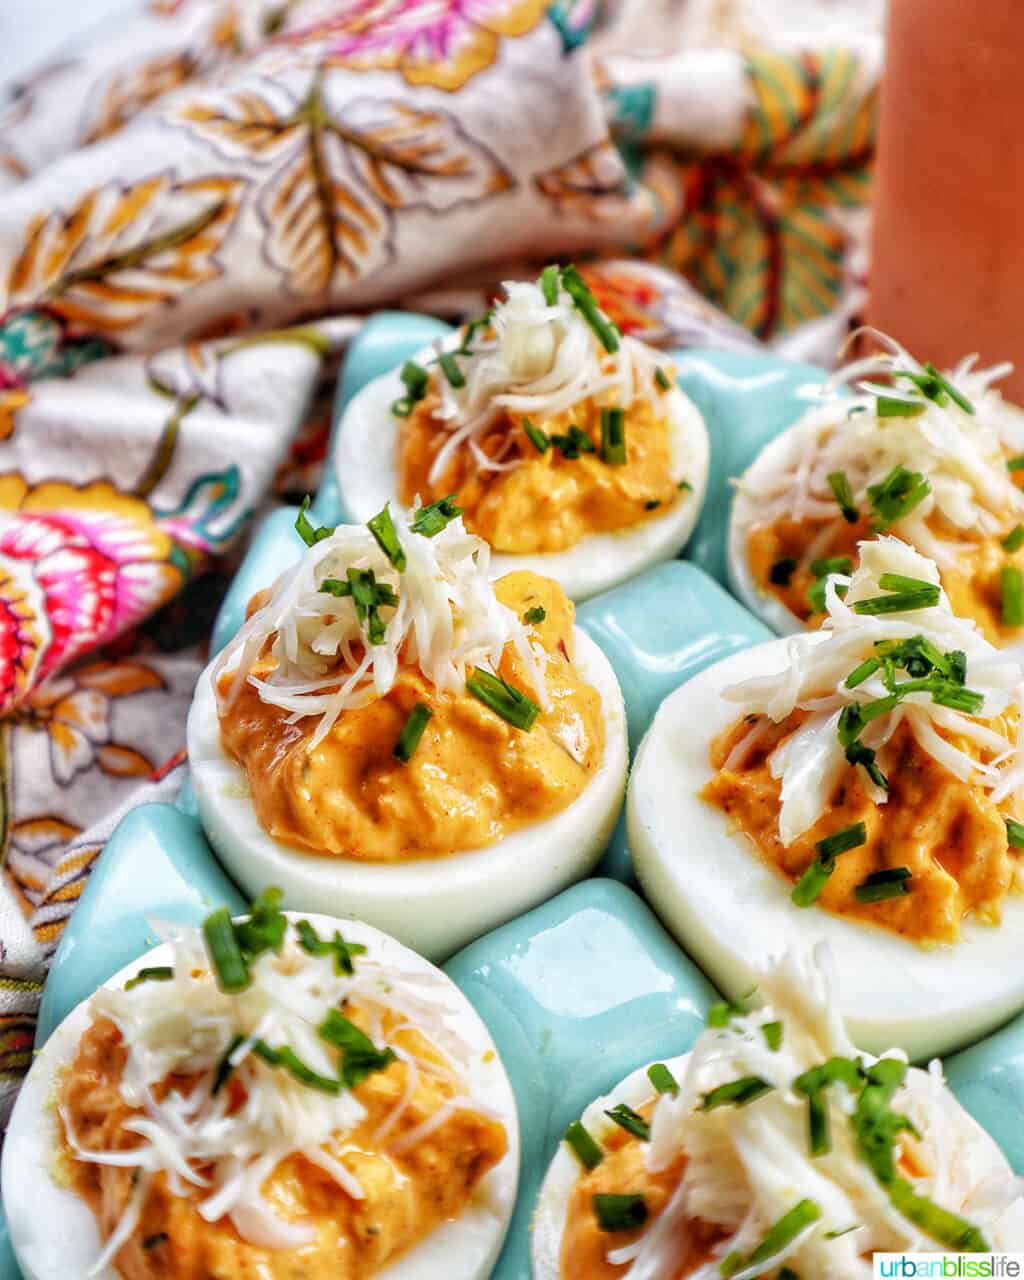 six crab deviled eggs in a blue egg holder.